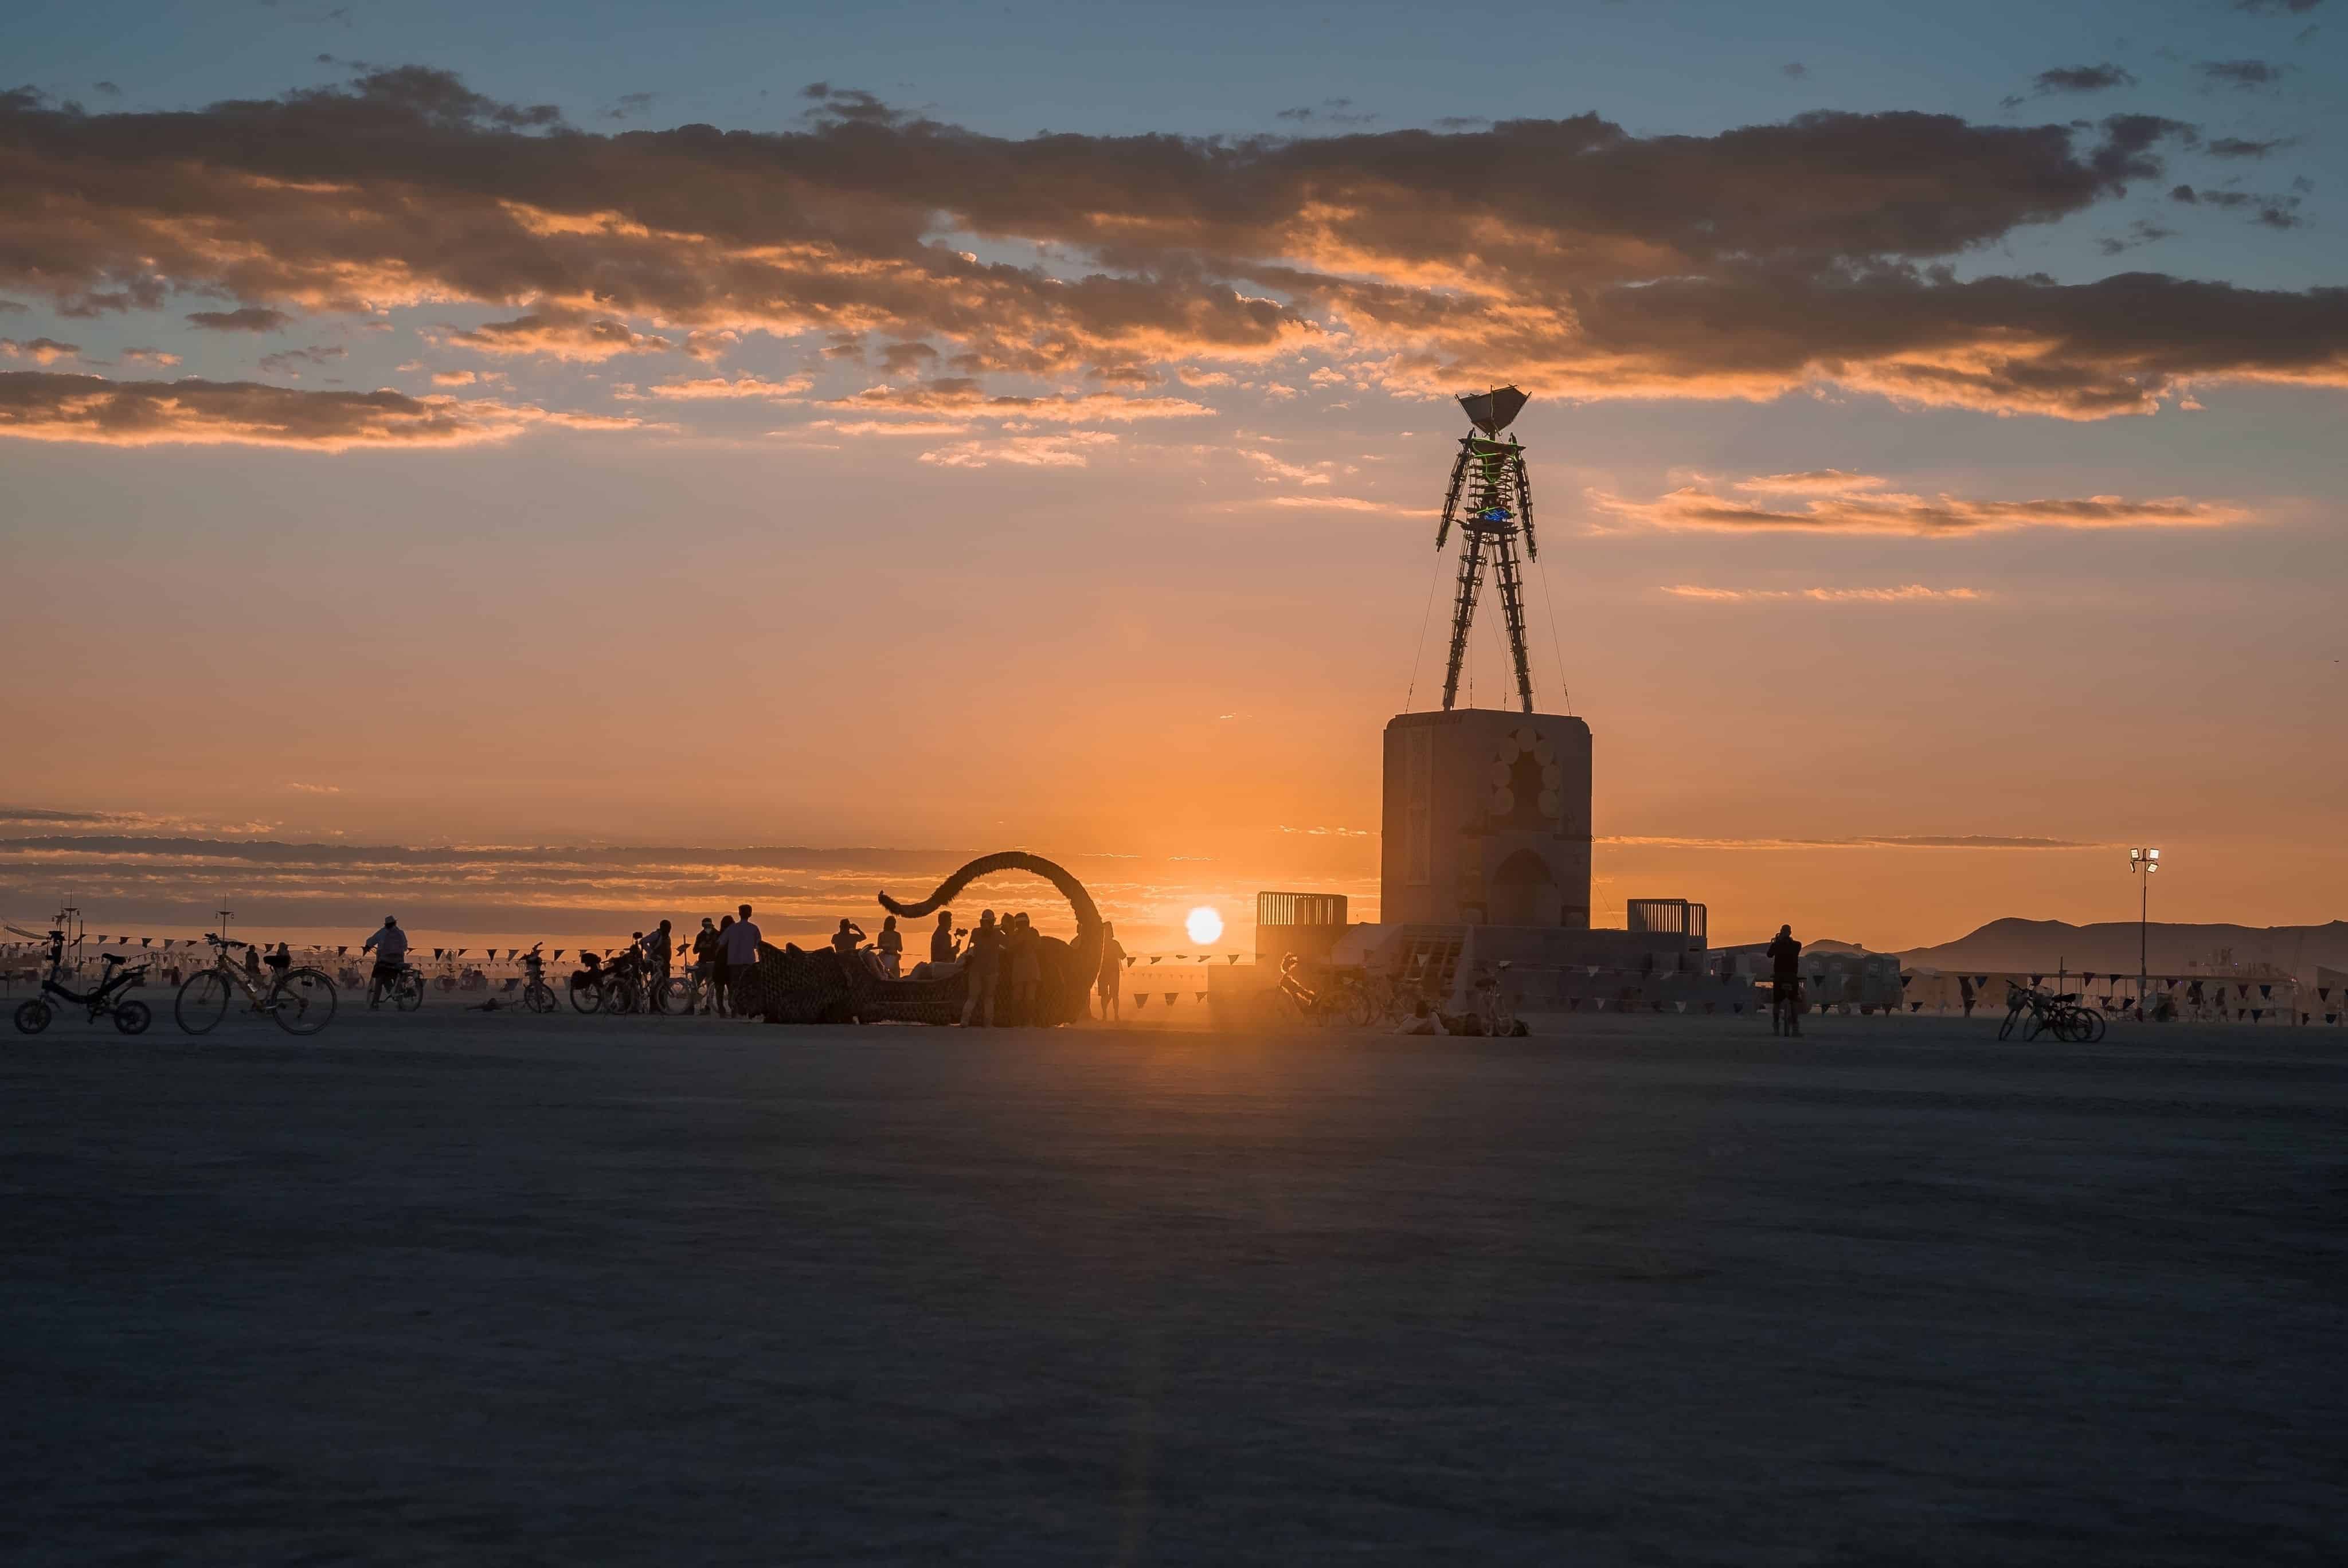 Nevada, United States. September 10, 2022. Beautiful desert with art objects at sunrise. Beautiful nature Burning Man festival with people riding bicycles.